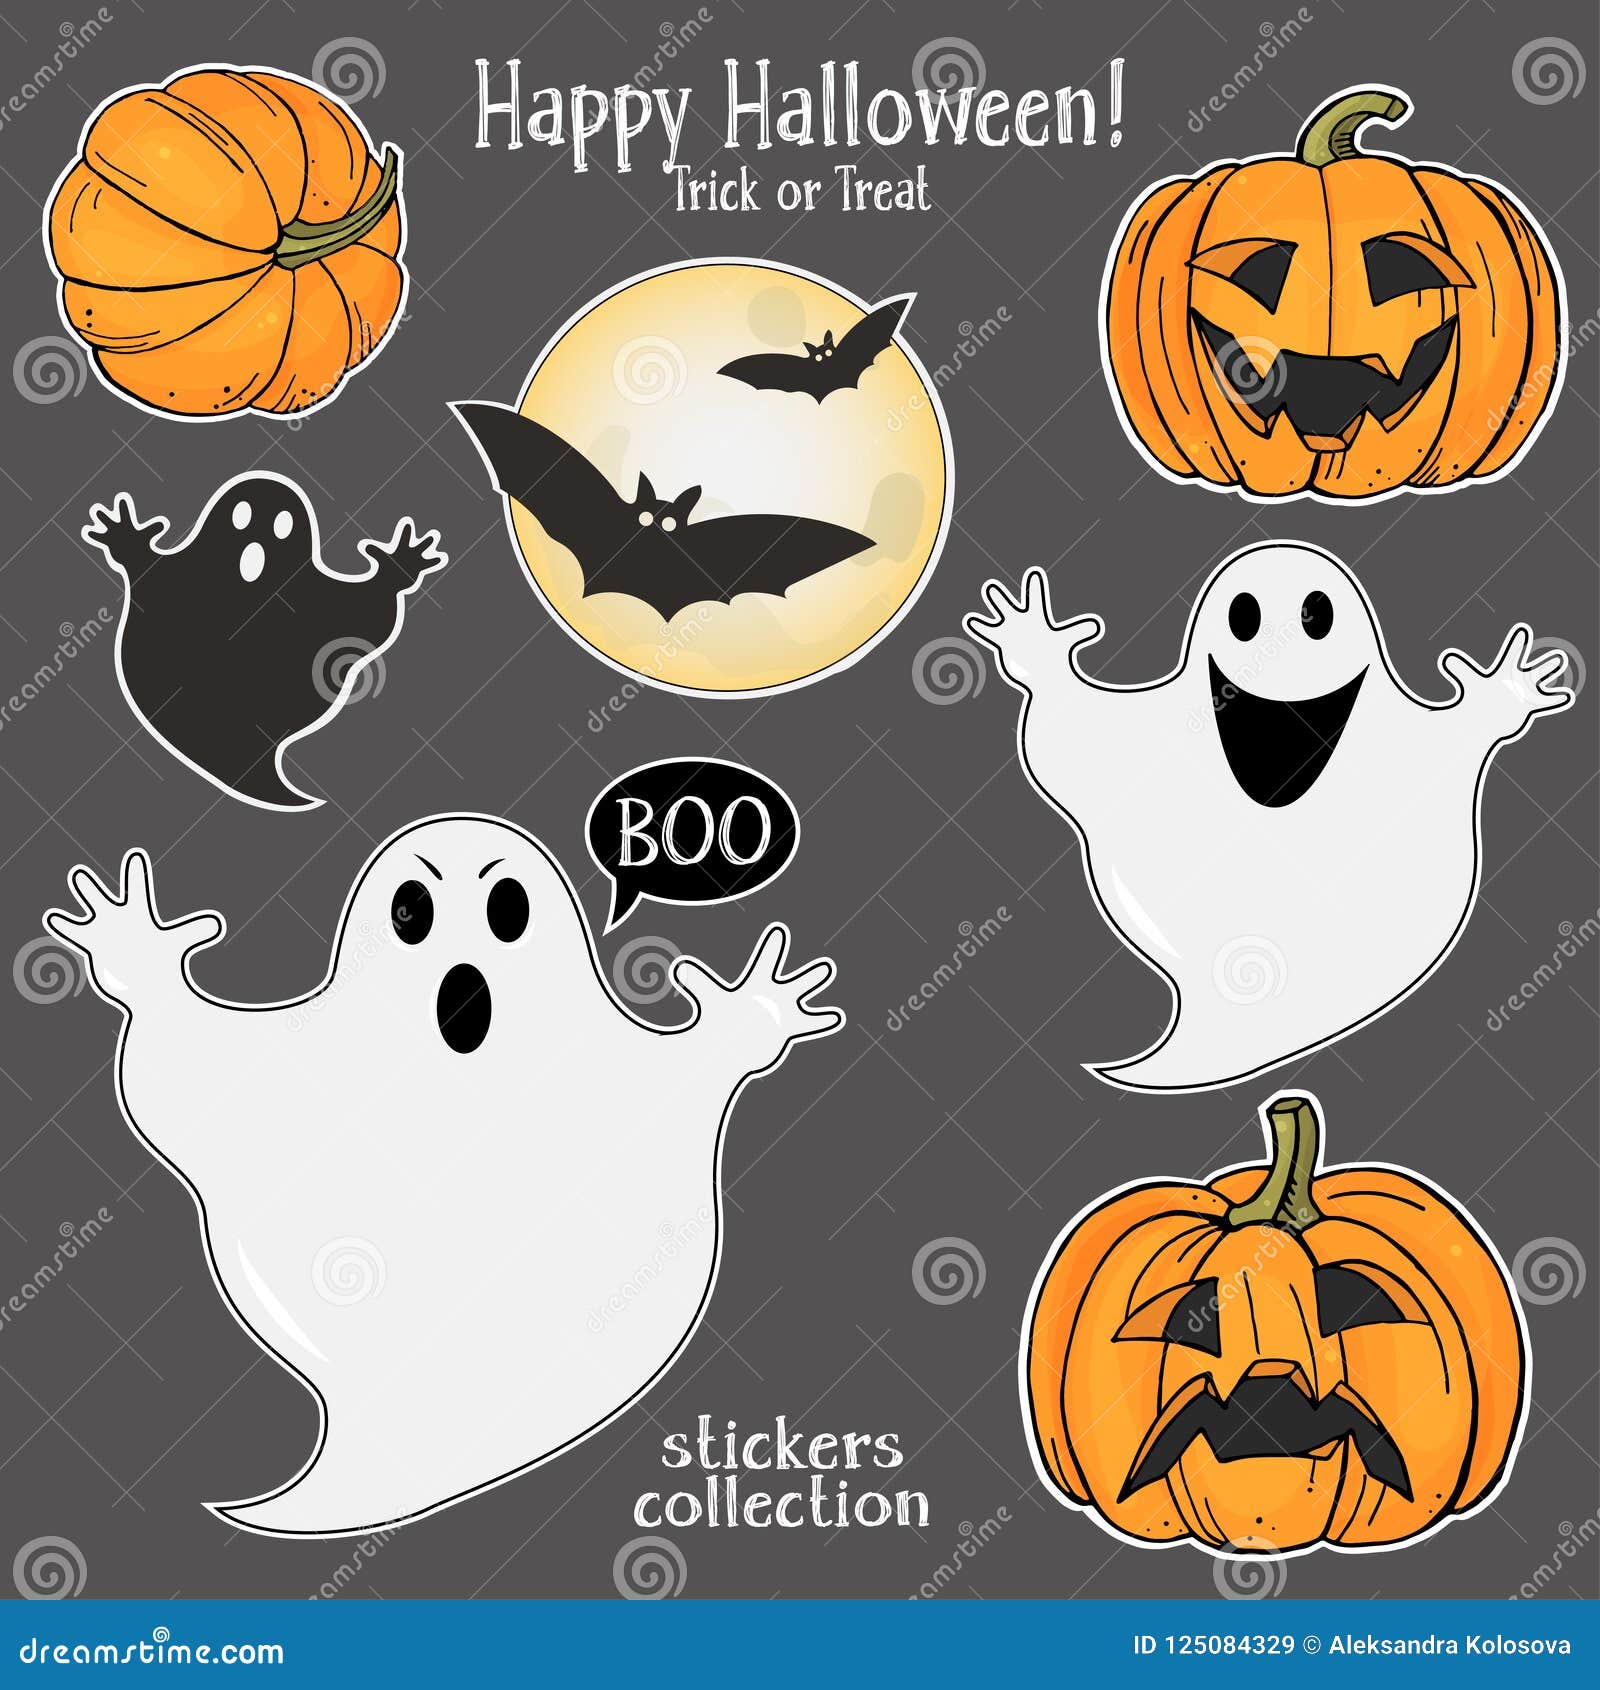 Halloween Stickers Patches Badges Cute Pumpkin Ghosts Kids And